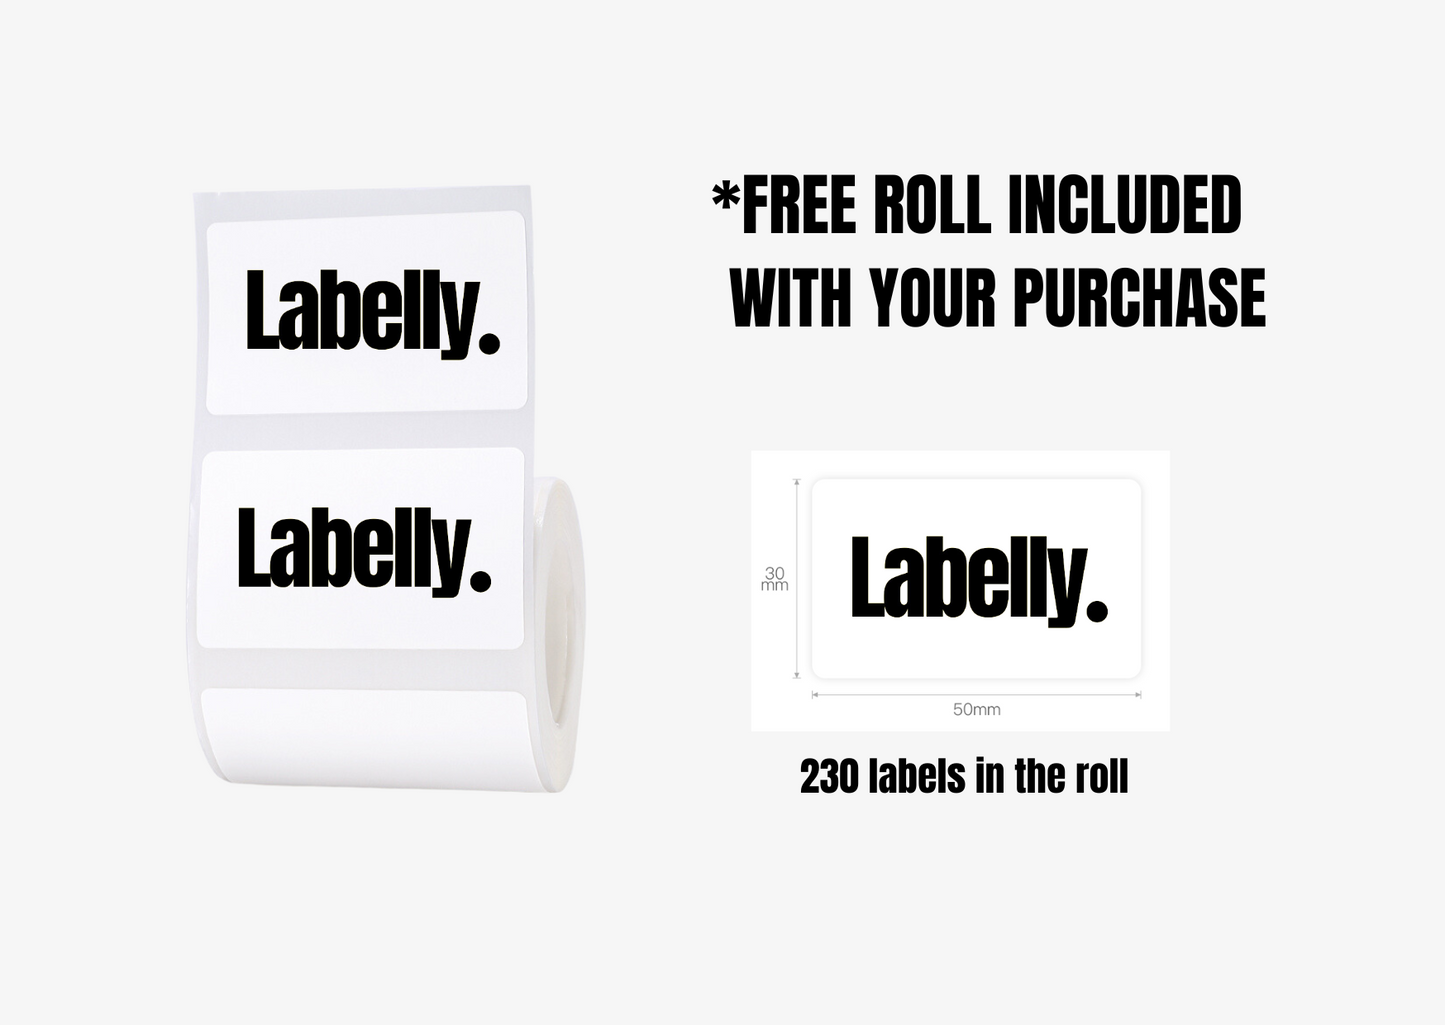 The Black Labelly Machine + Free Roll of 230 Labels